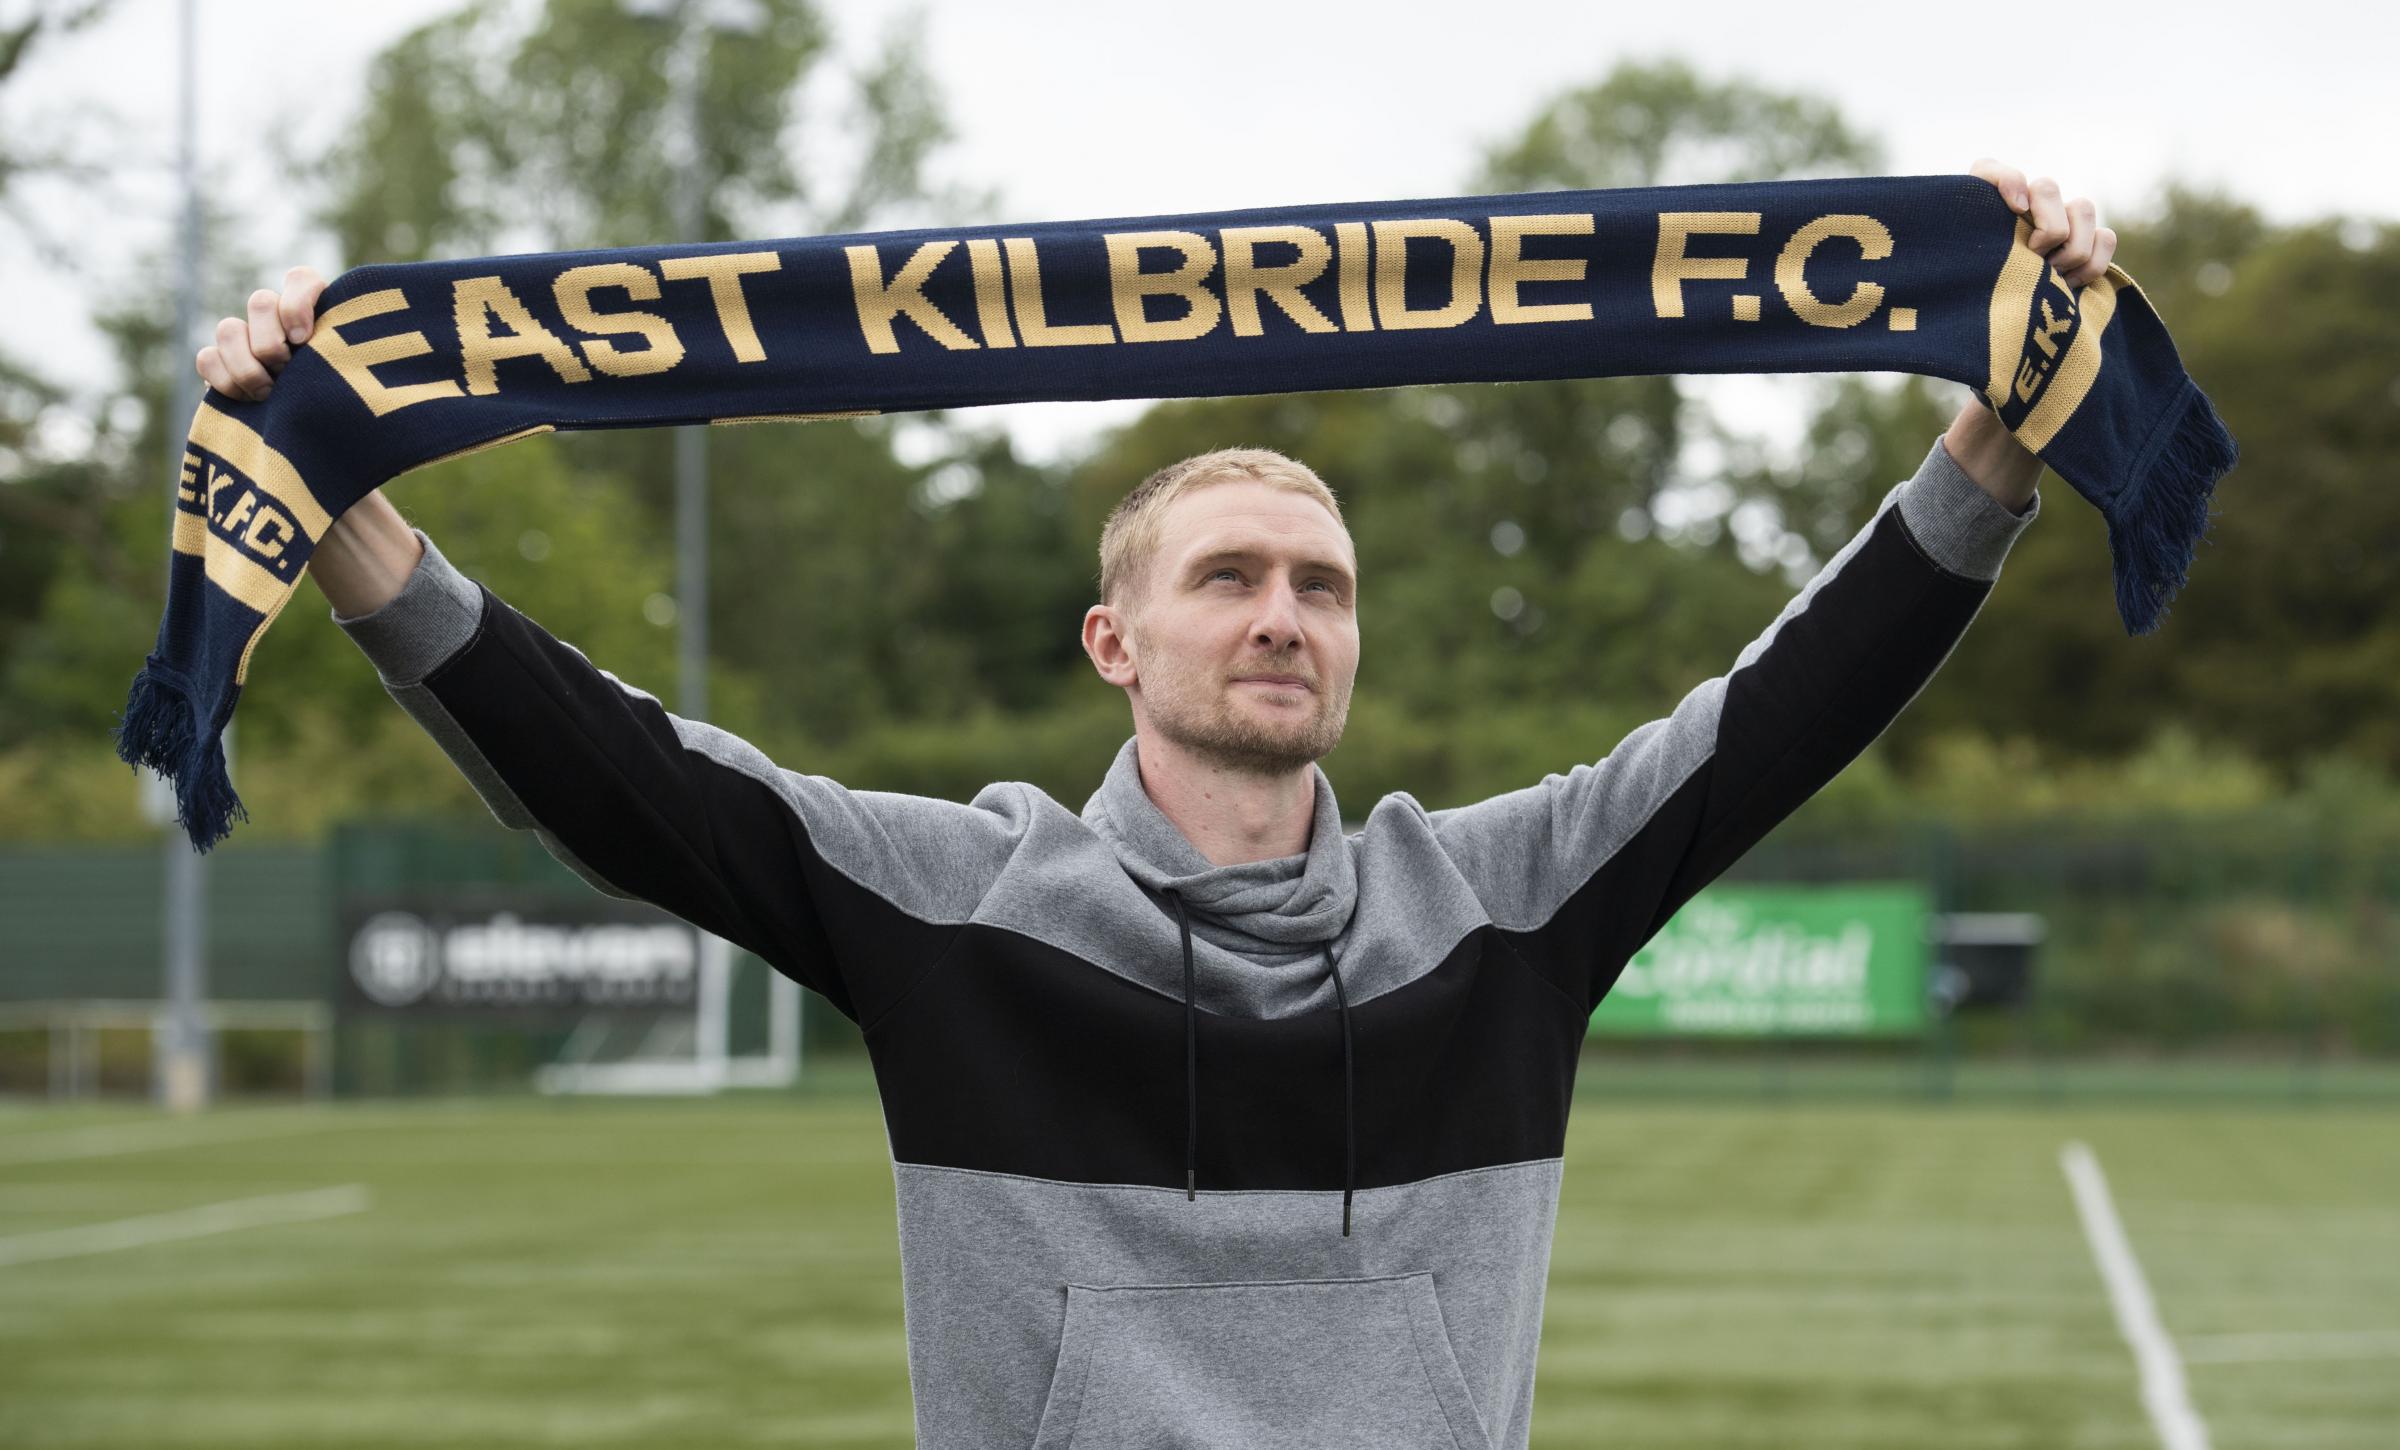 Chris Erskine ambitious as ever as midfielder embarks on a new chapter with East Kilbride